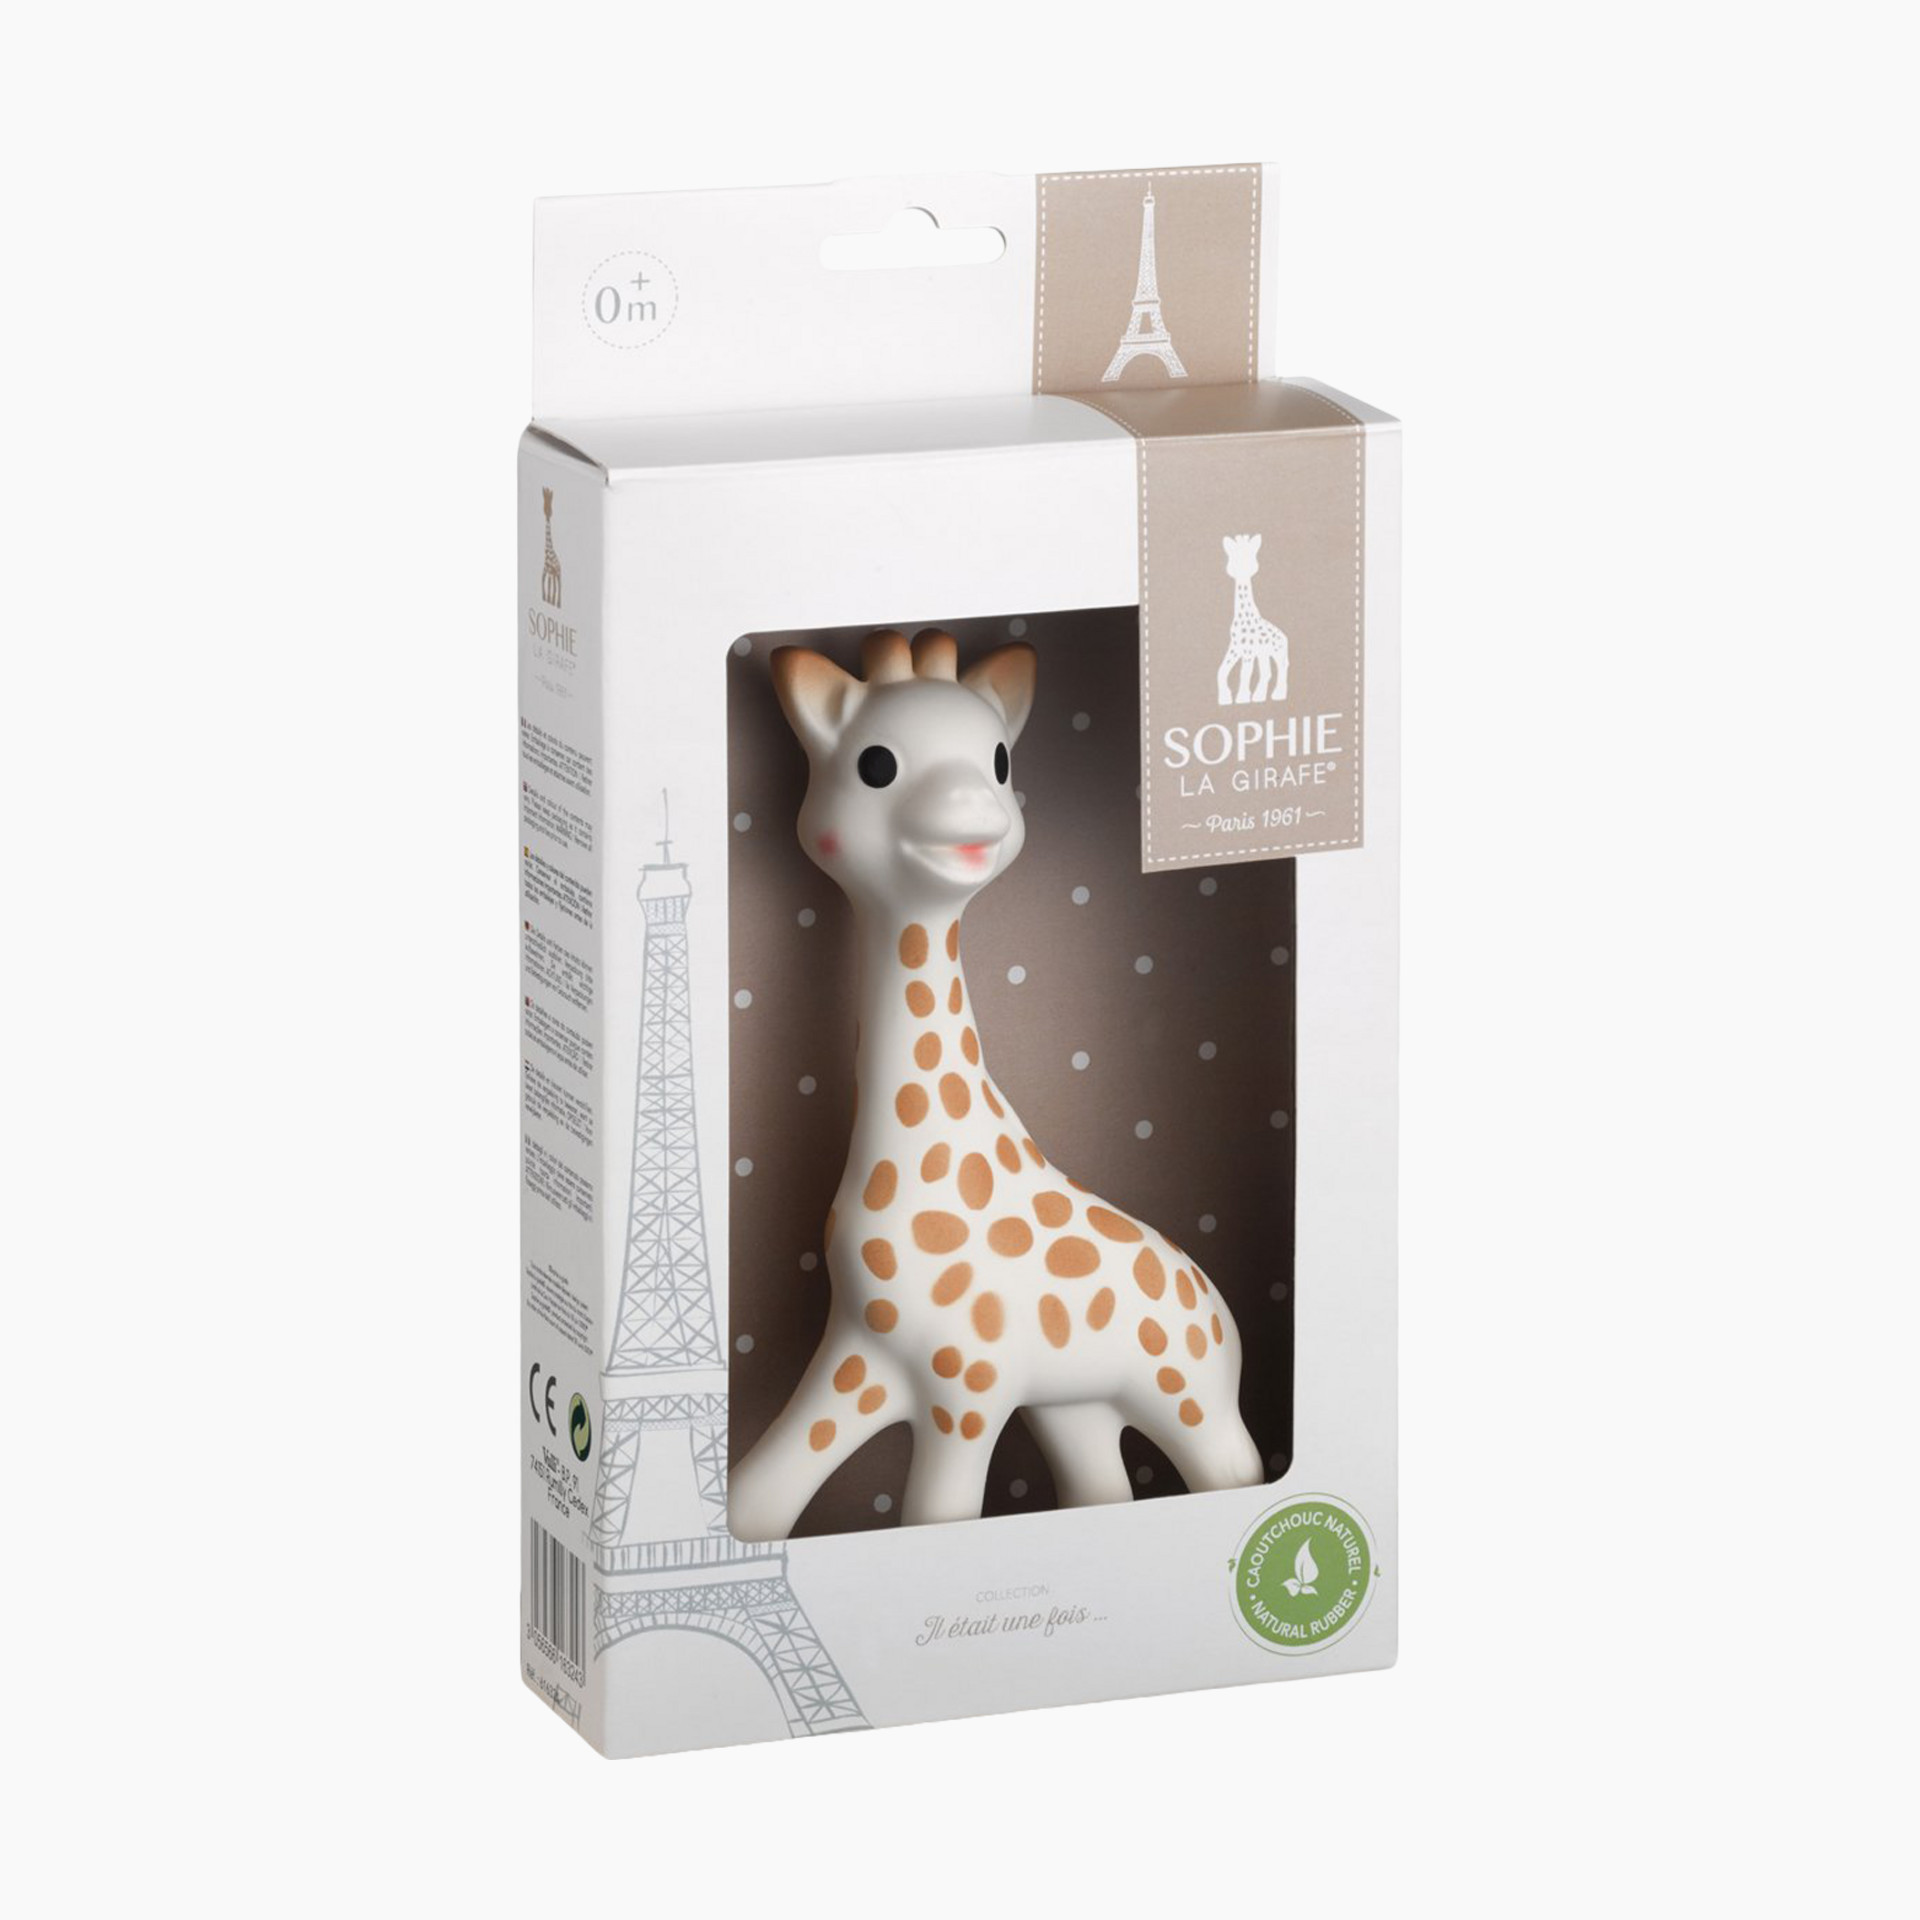 Sophie The Giraffe Teething Toys Can Grow Mold—What You Should Know